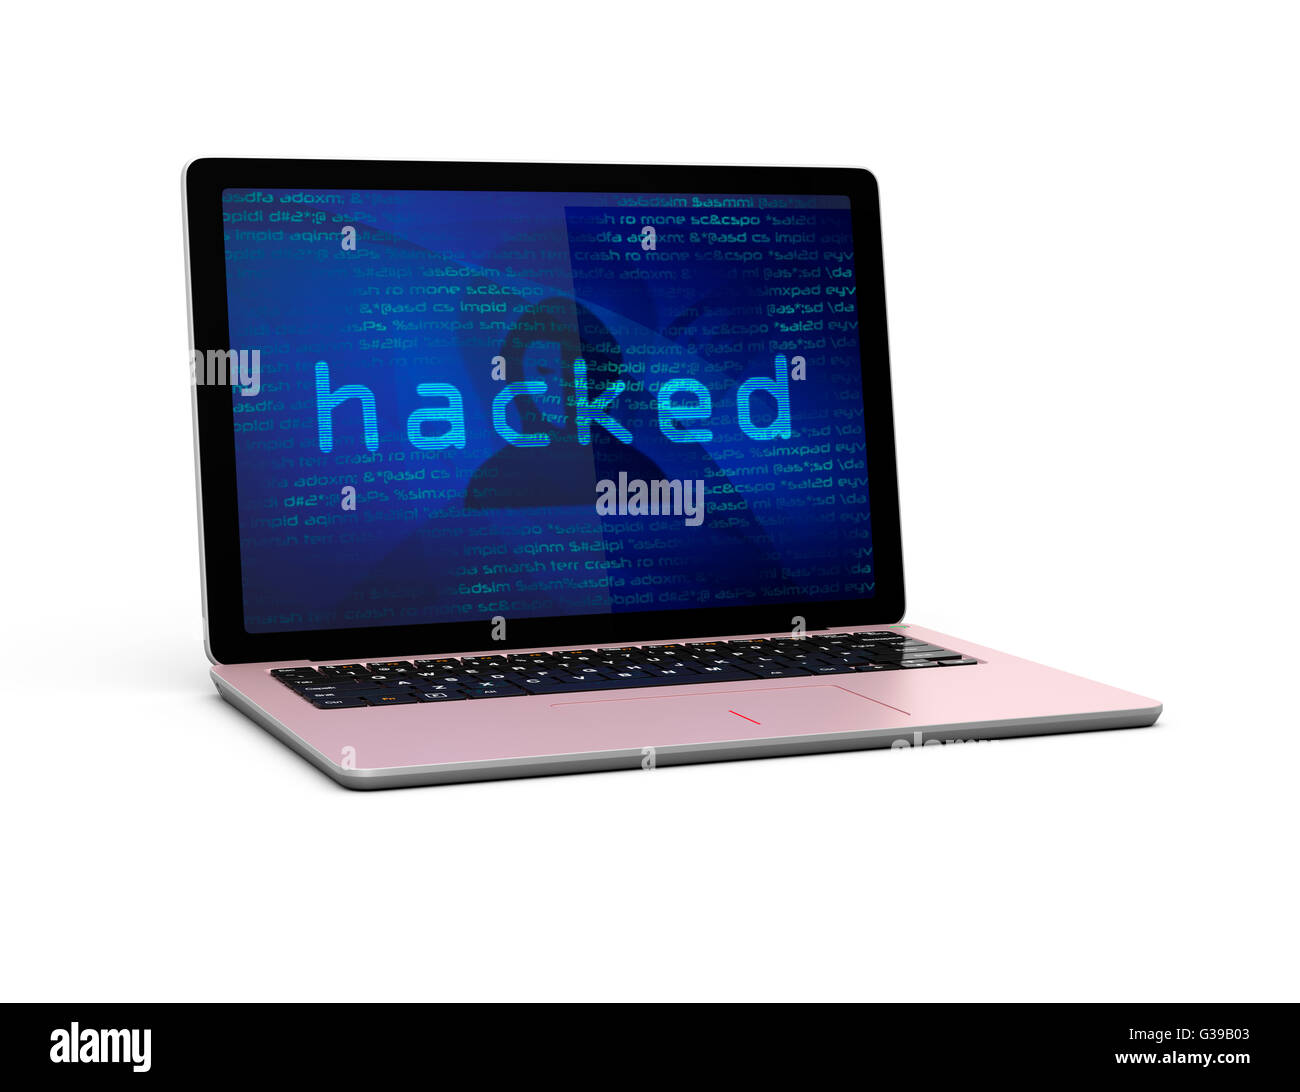 Laptop computer screen showing under hacker's attack. Computer security concept. 3D rendering image with clipping path. Stock Photo